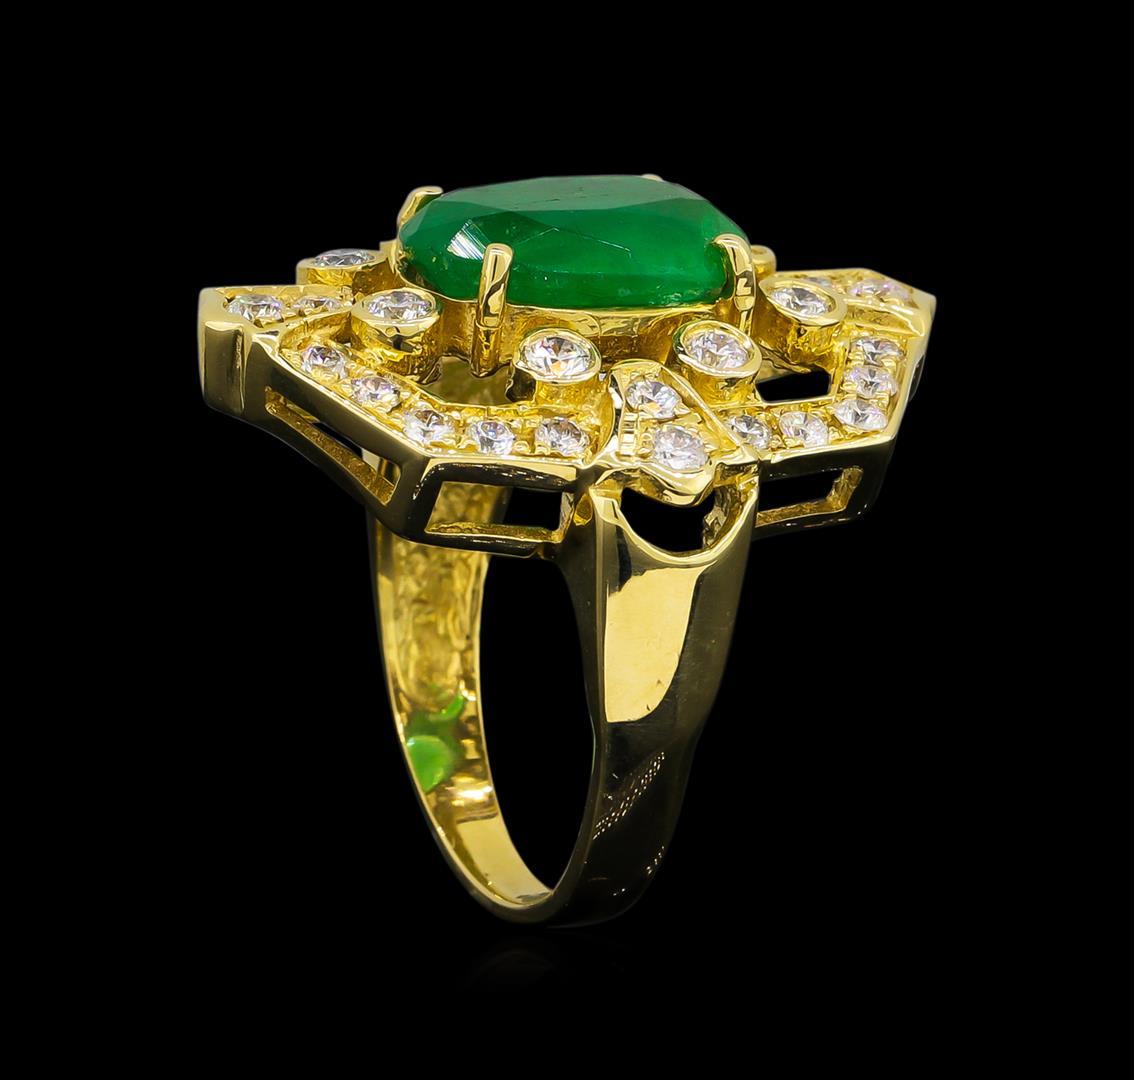 14KT Yellow Gold 2.85 ctw Emerald and Diamond Ring